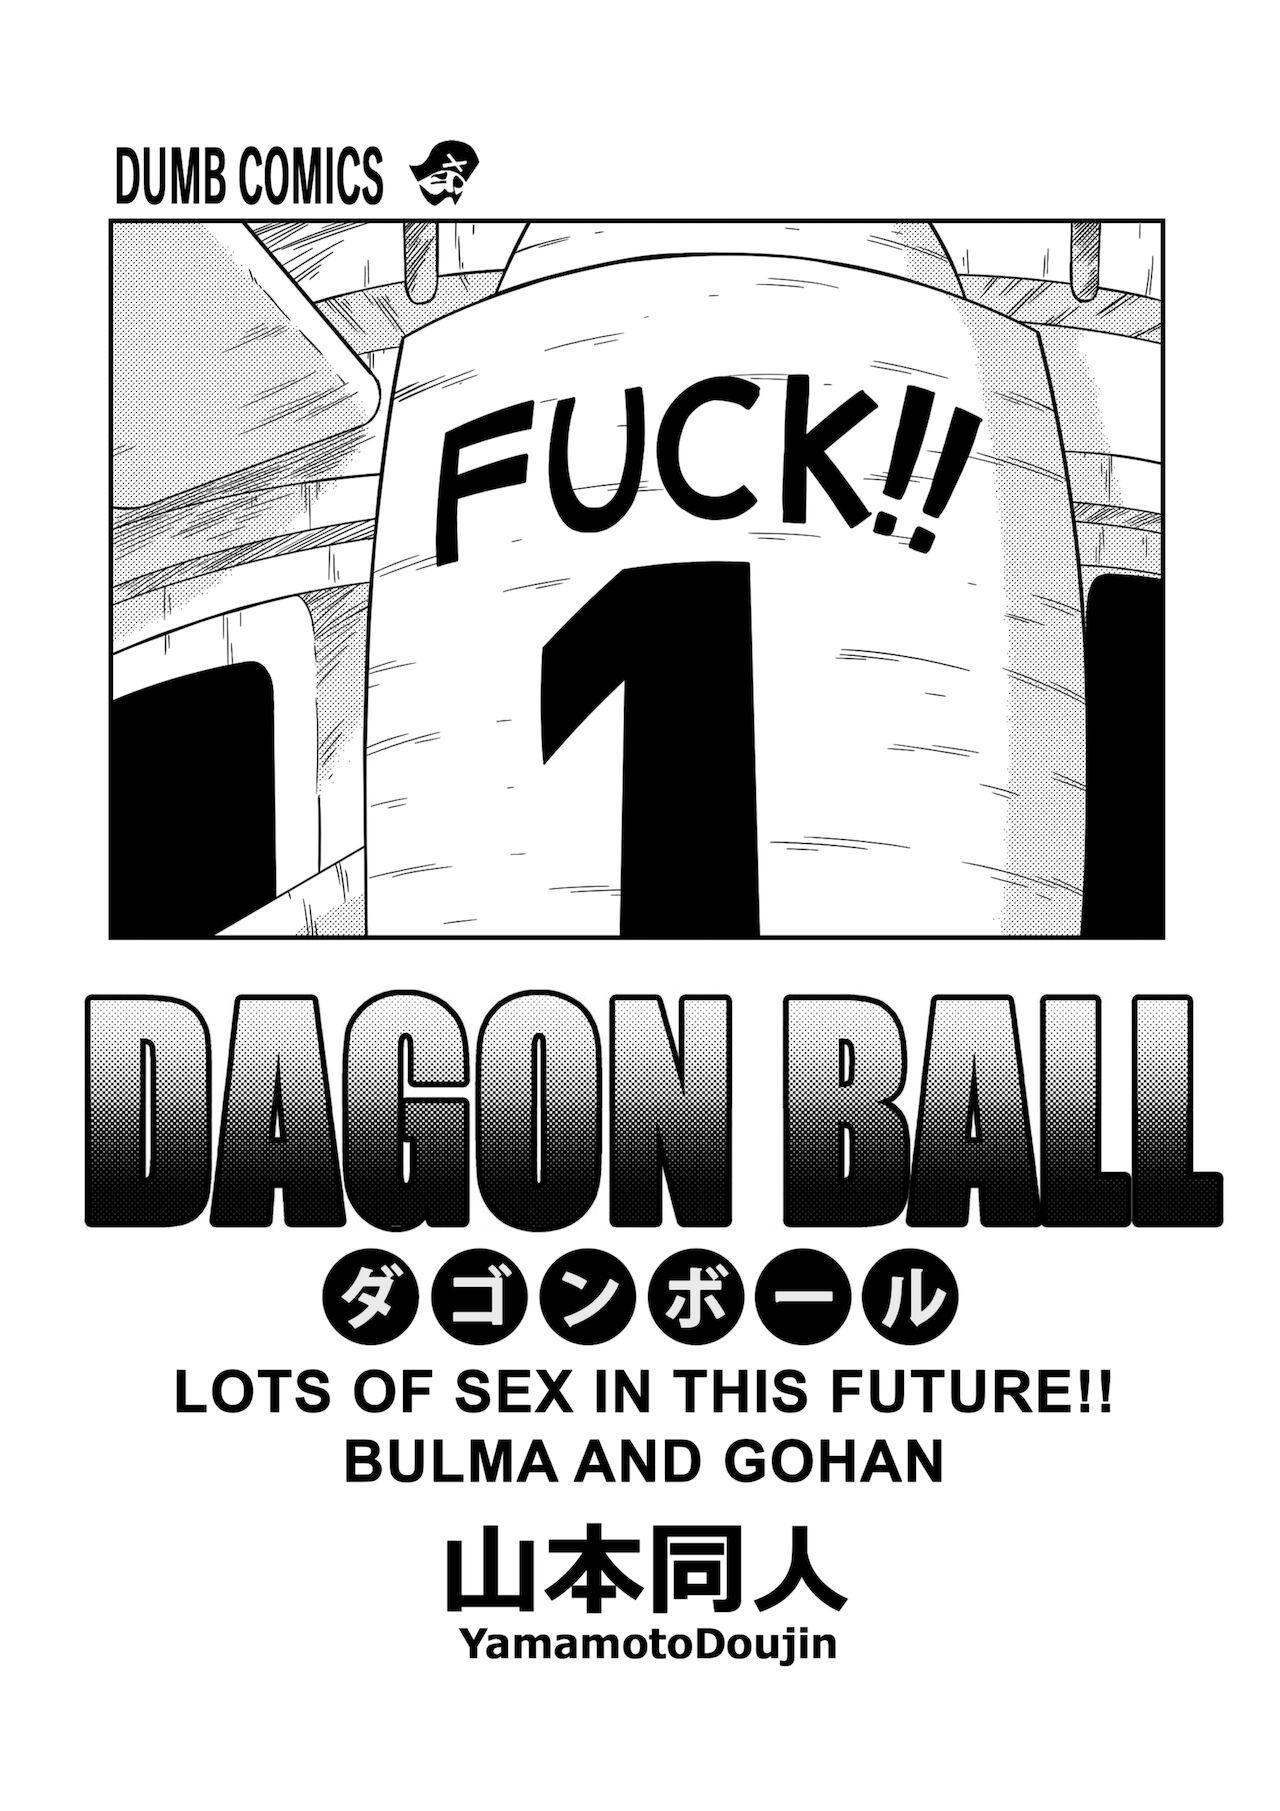 Boquete Lots of Sex in this Future!! - Dragon ball z Watersports - Page 2